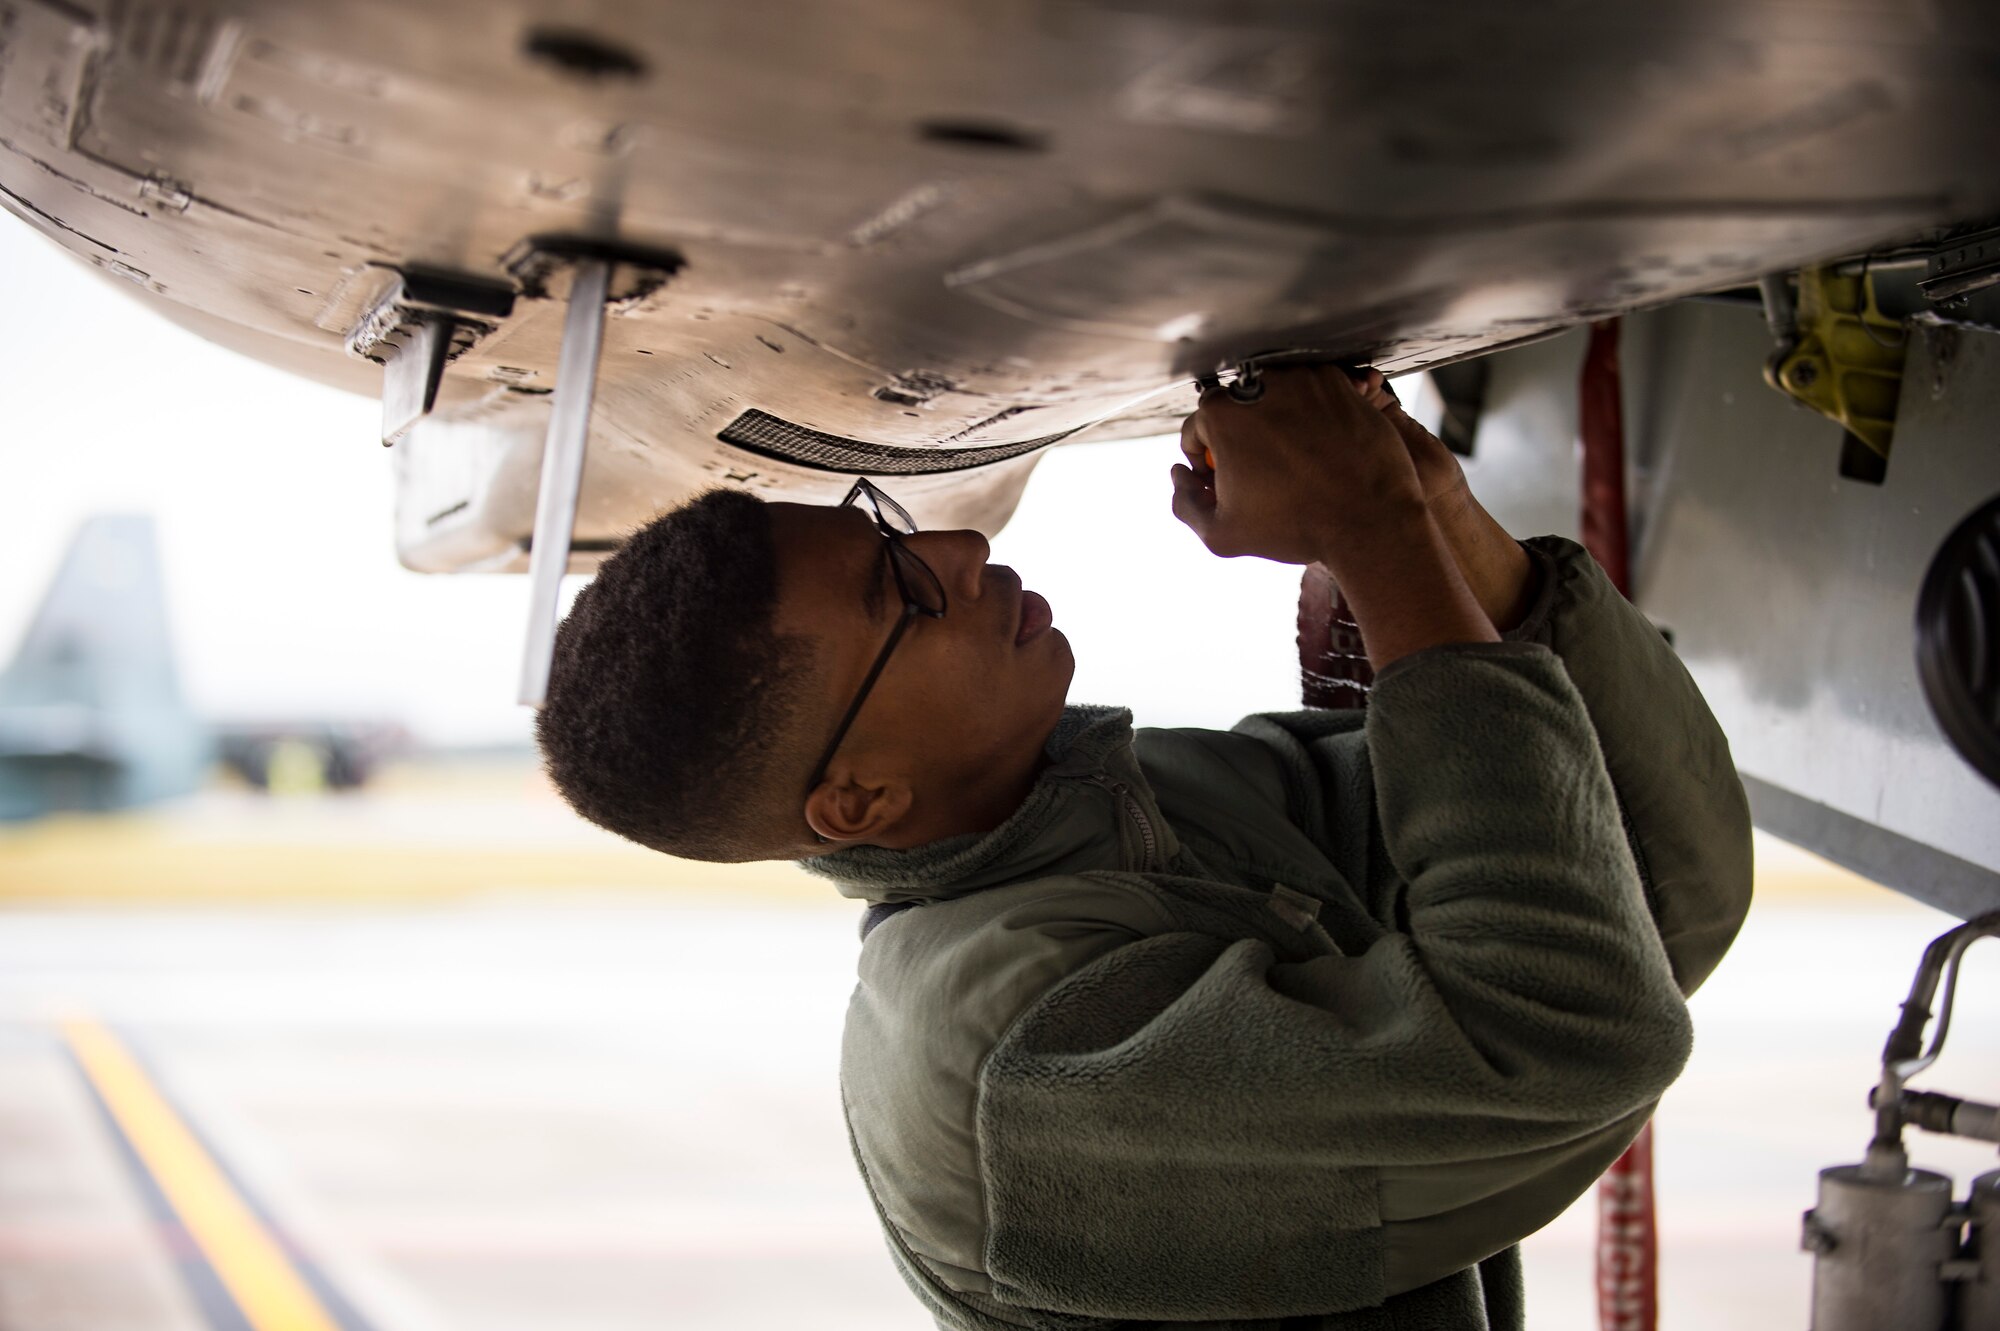 A crew chief from the 23d Aircraft Maintenance Squadron secures a panel on an A-10C Thunderbolt II during a thru flight inspection, Dec. 7, 2017, at Moody Air Force Base, Ga. Moody recently participated in a week-long, Phase 1, Phase 2 exercise designed to demonstrate the 23d Wing’s ability to meet combatant commander objectives. The exercise tested pilots’ and maintainers’ ability to launch around-the-clock sorties at an accelerated rate during surge operations. (U.S. Air Force photo by Andrea Jenkins)